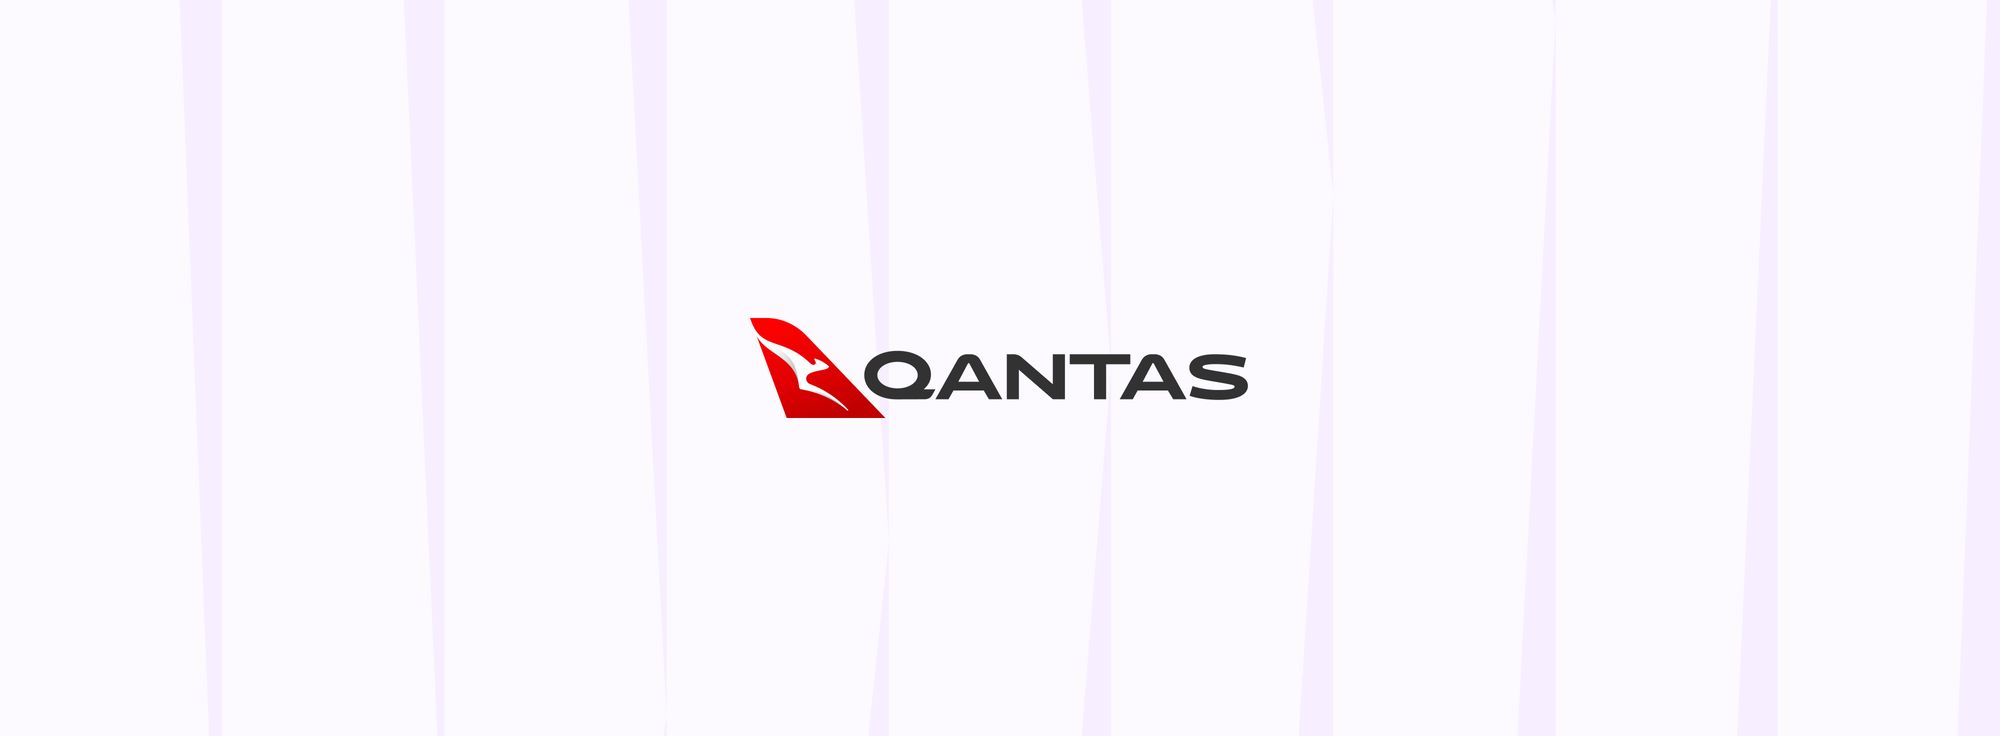 Duffel expands further as a new partnership with Qantas comes online